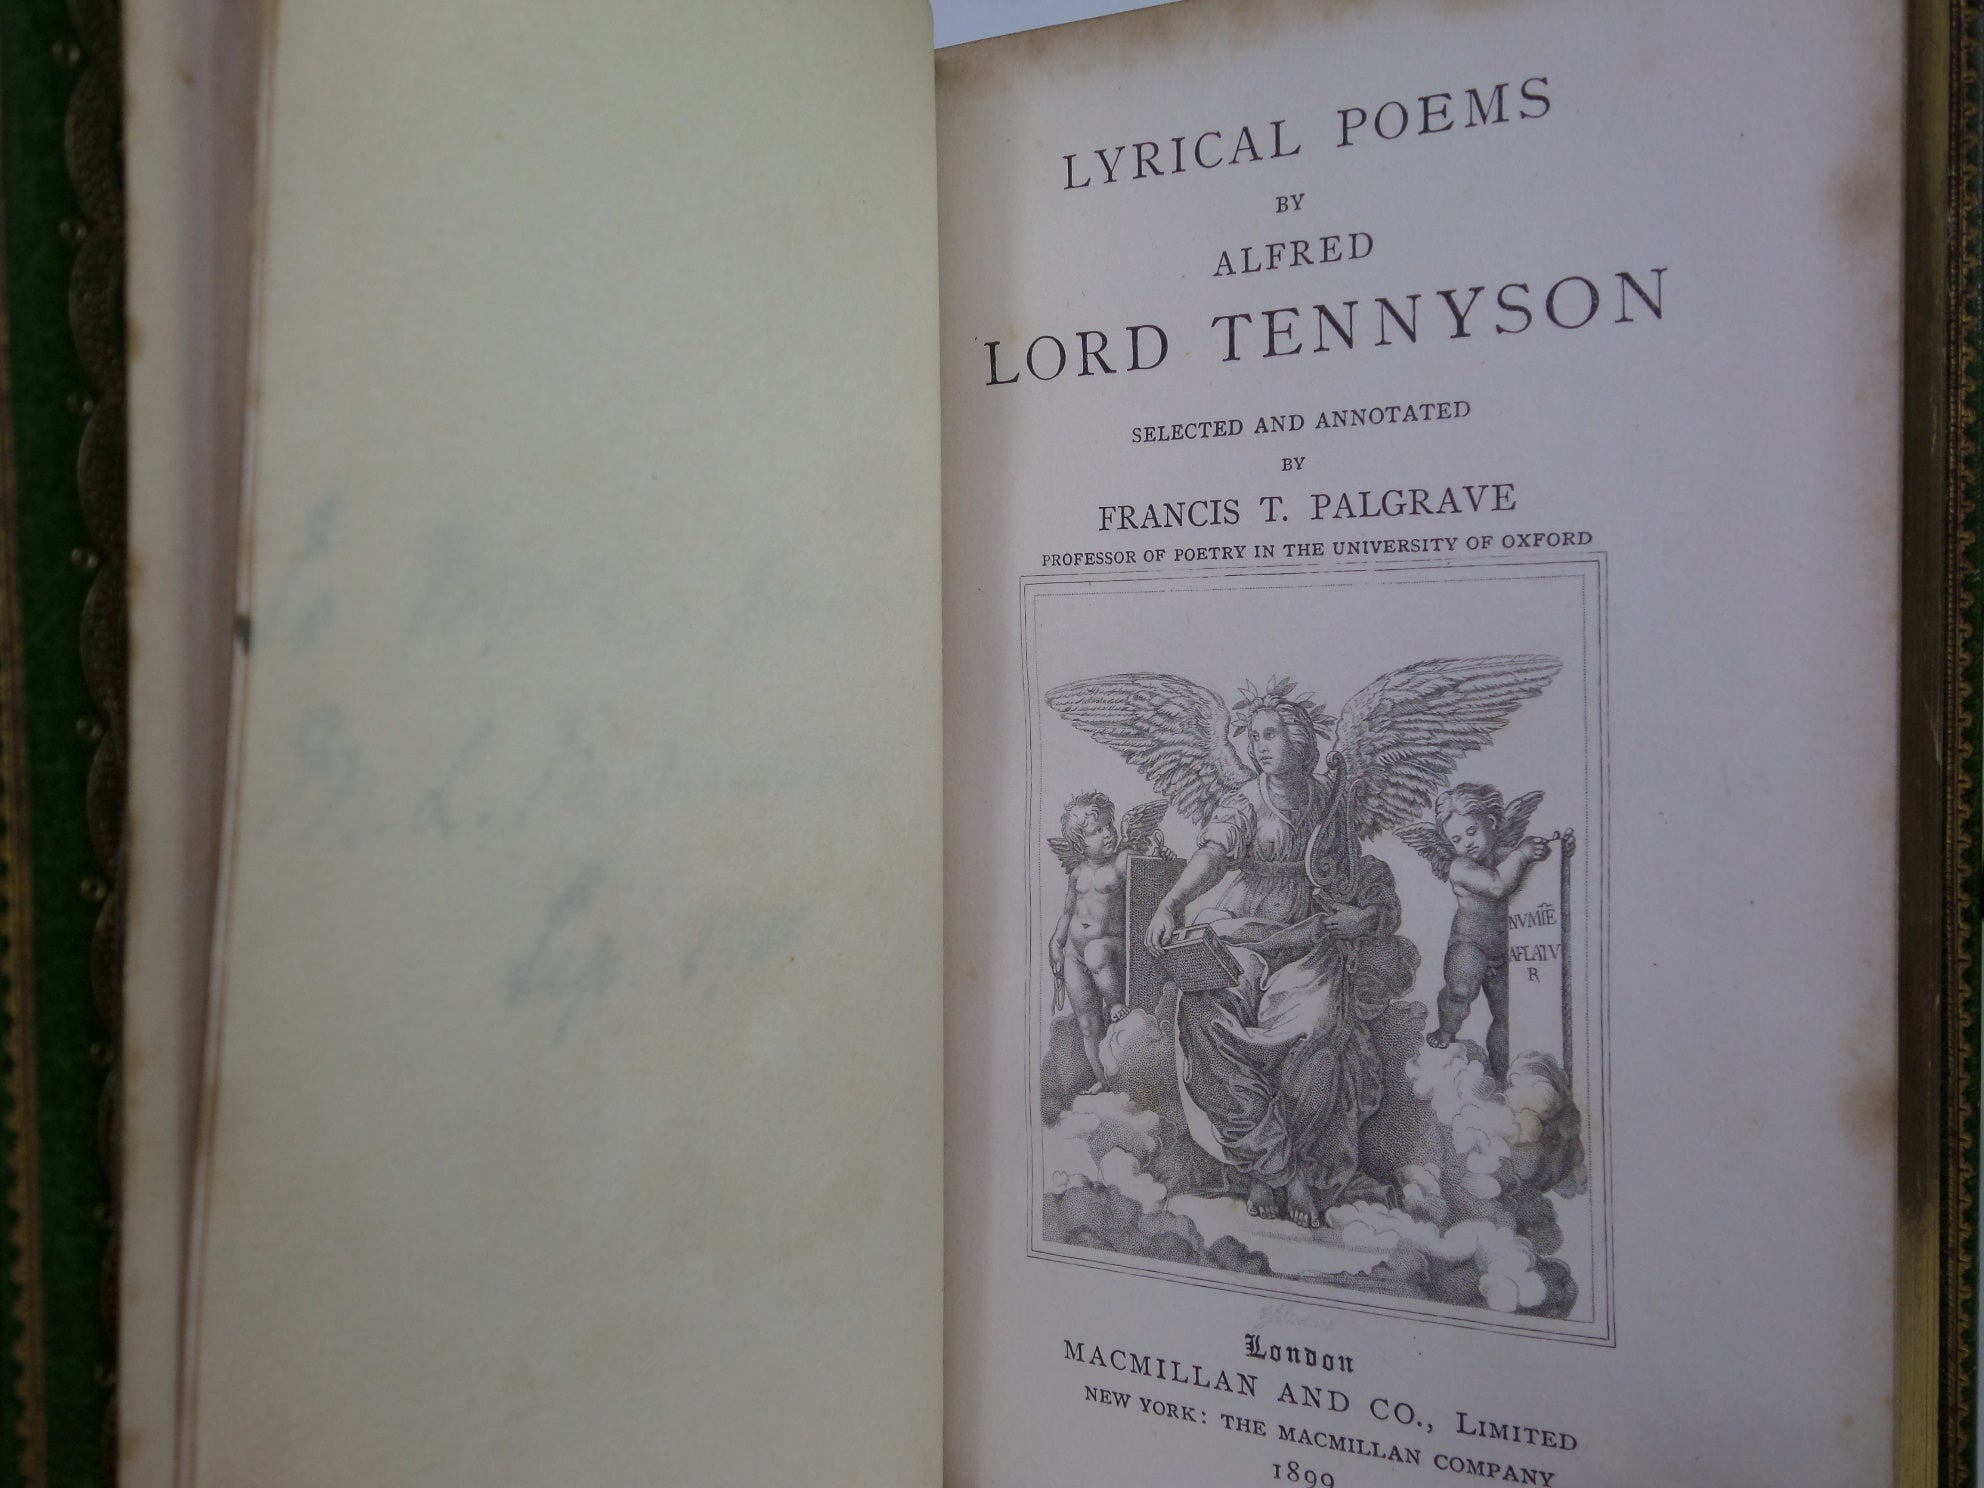 LYRICAL POEMS BY ALFRED LORD TENNYSON 1899 FINE BINDING BY RAMAGE